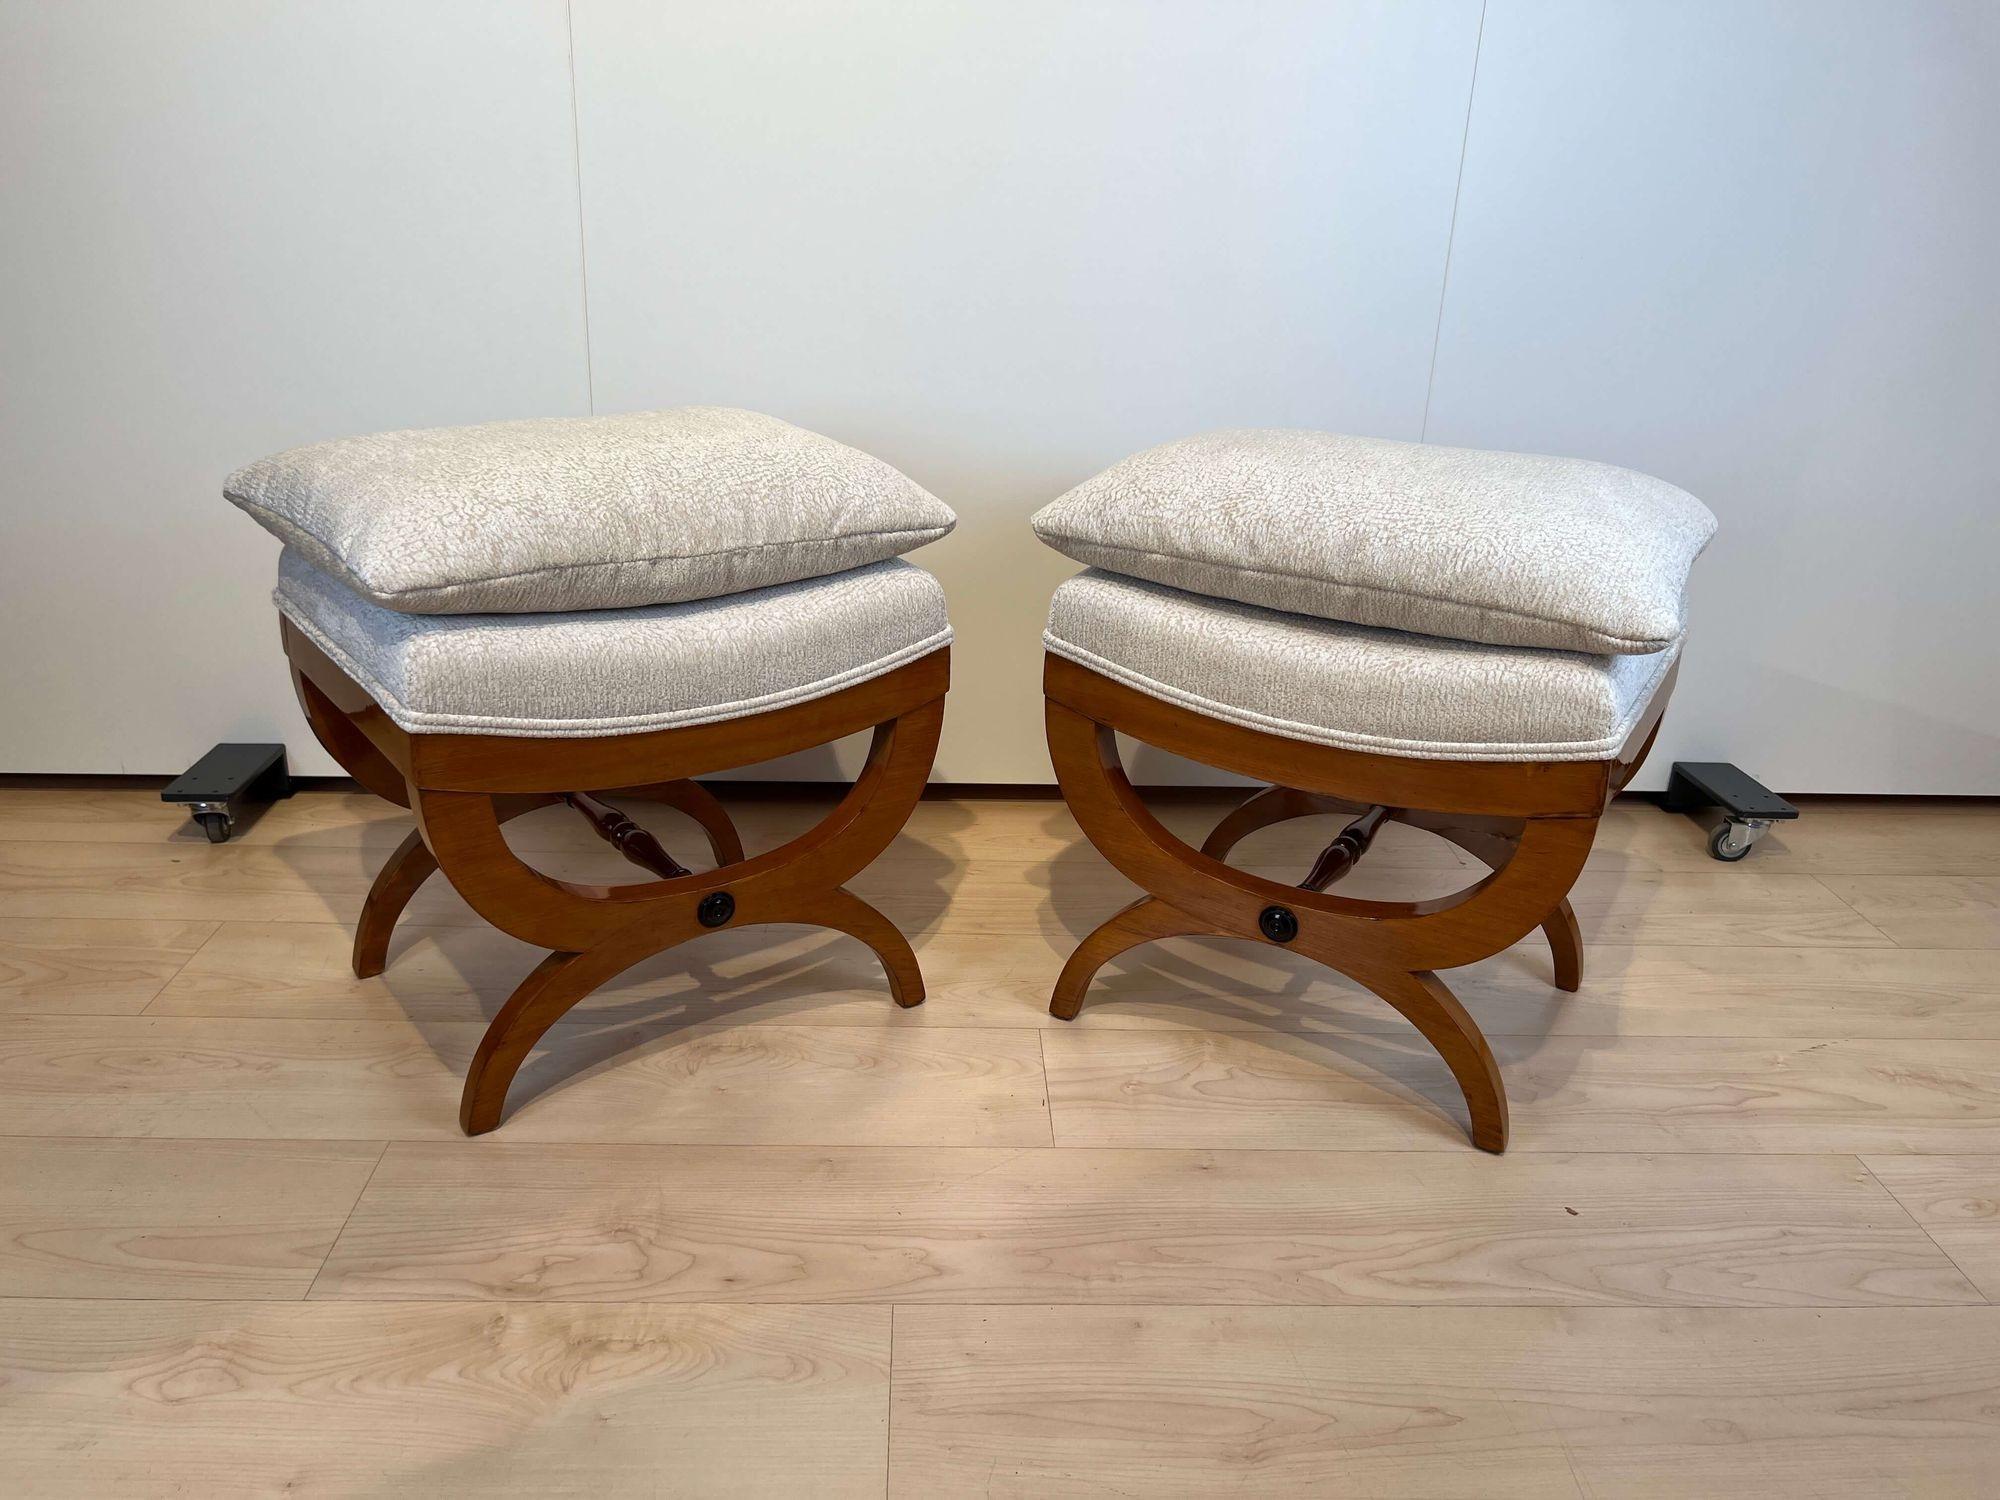 Neoclassical Pair of Large Tabourets, Beech Wood, France, circa 1860 For Sale